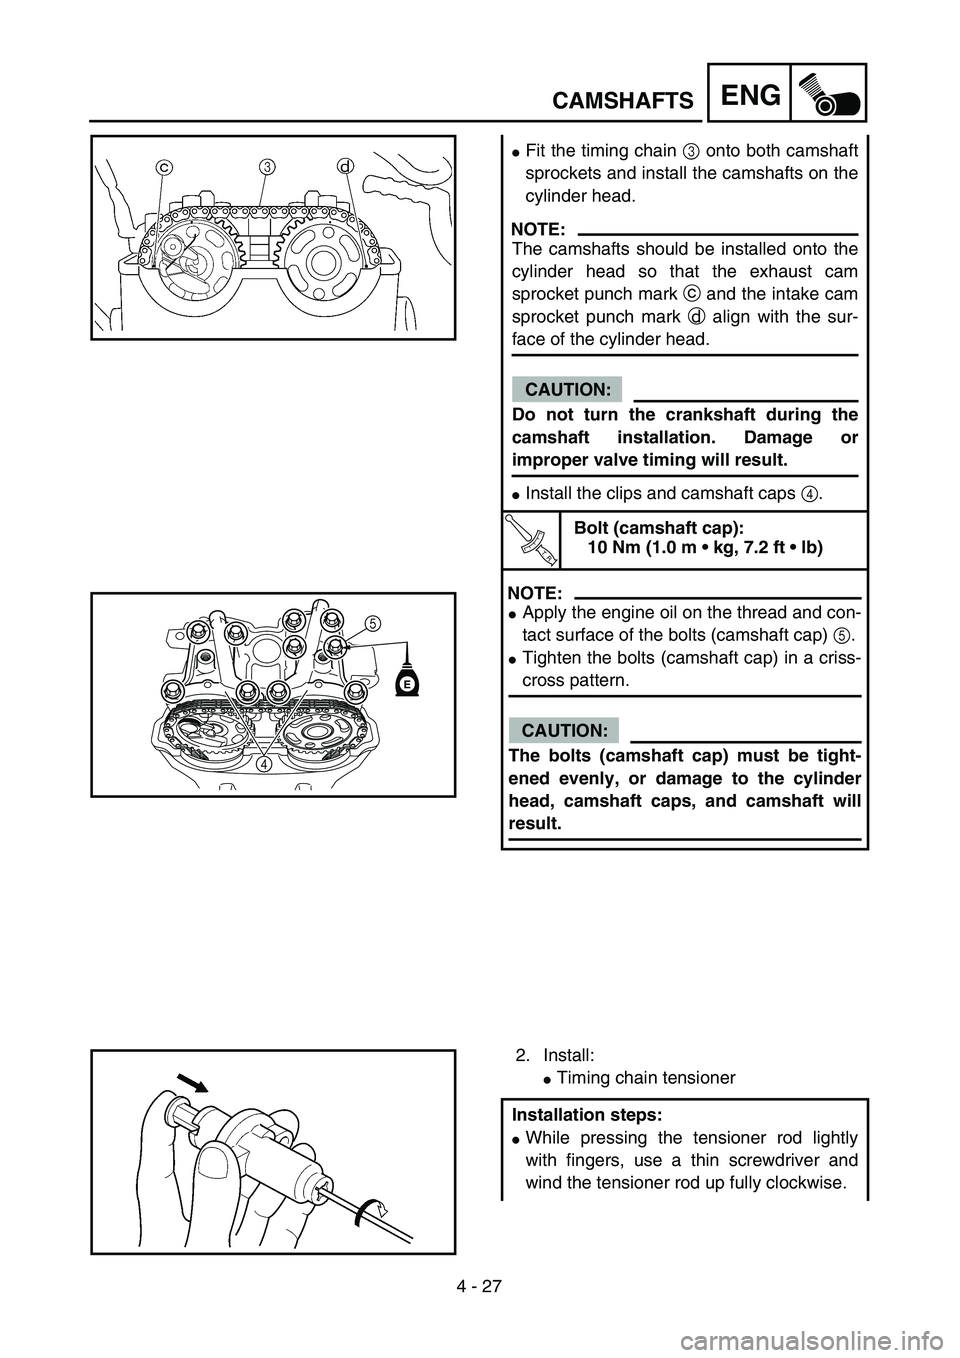 YAMAHA WR 450F 2004  Manuale de Empleo (in Spanish) 4 - 27
ENGCAMSHAFTS
Fit the timing chain 3 onto both camshaft
sprockets and install the camshafts on the
cylinder head.
NOTE:
The camshafts should be installed onto the
cylinder head so that the exha